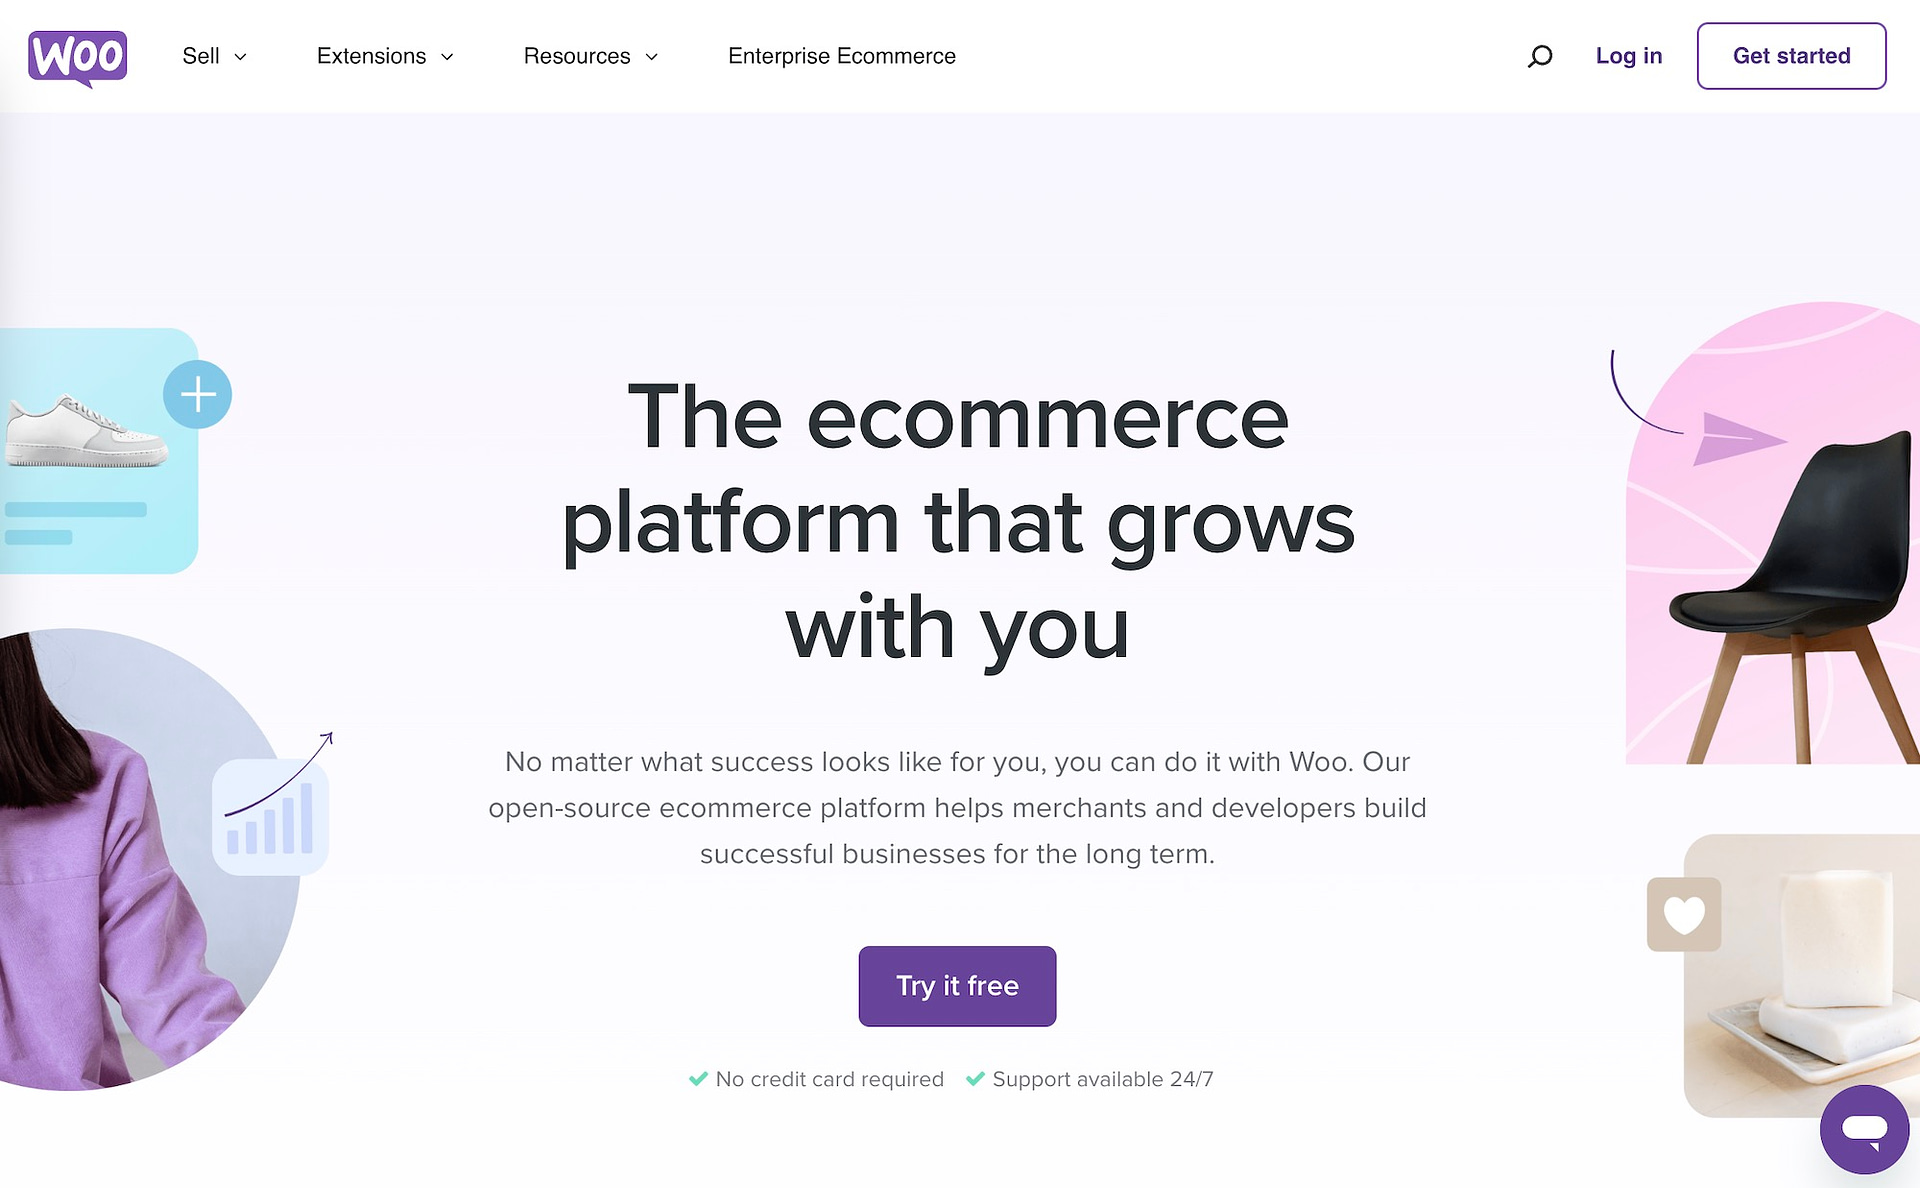 WooCommerce is an excellent platform for selling digital products